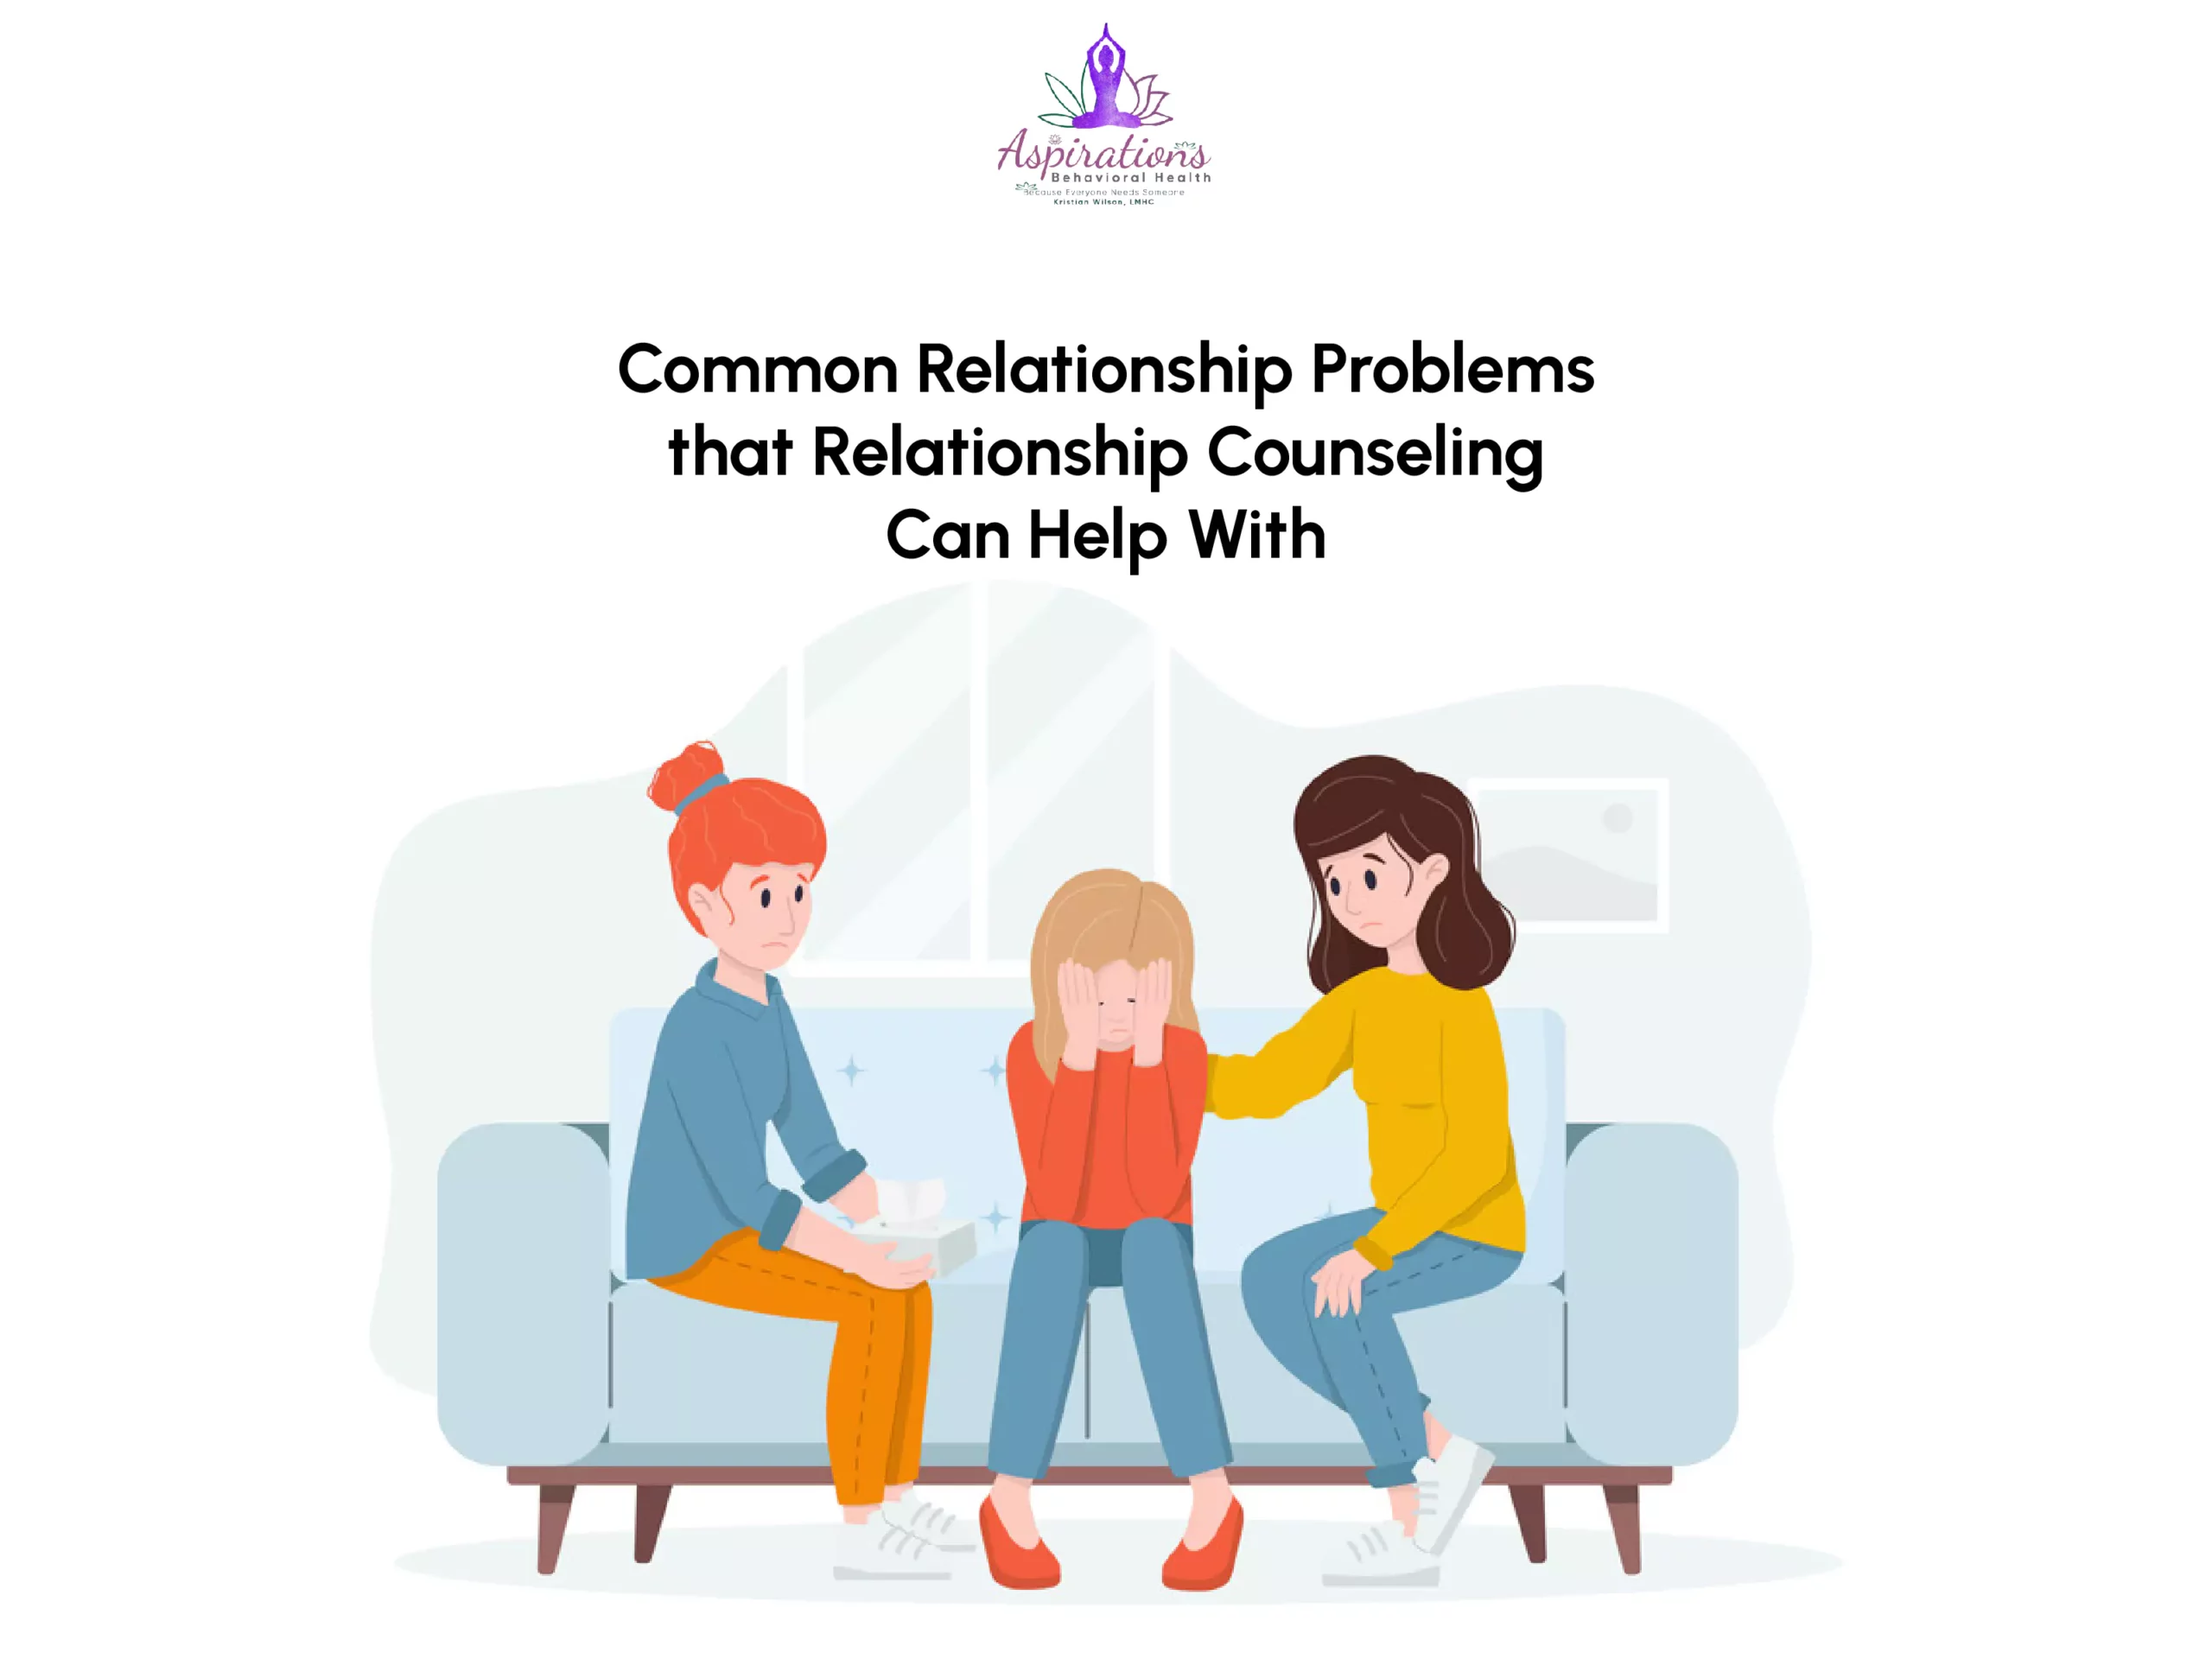 Common Relationship Problems that Relationship Counseling Can Help With